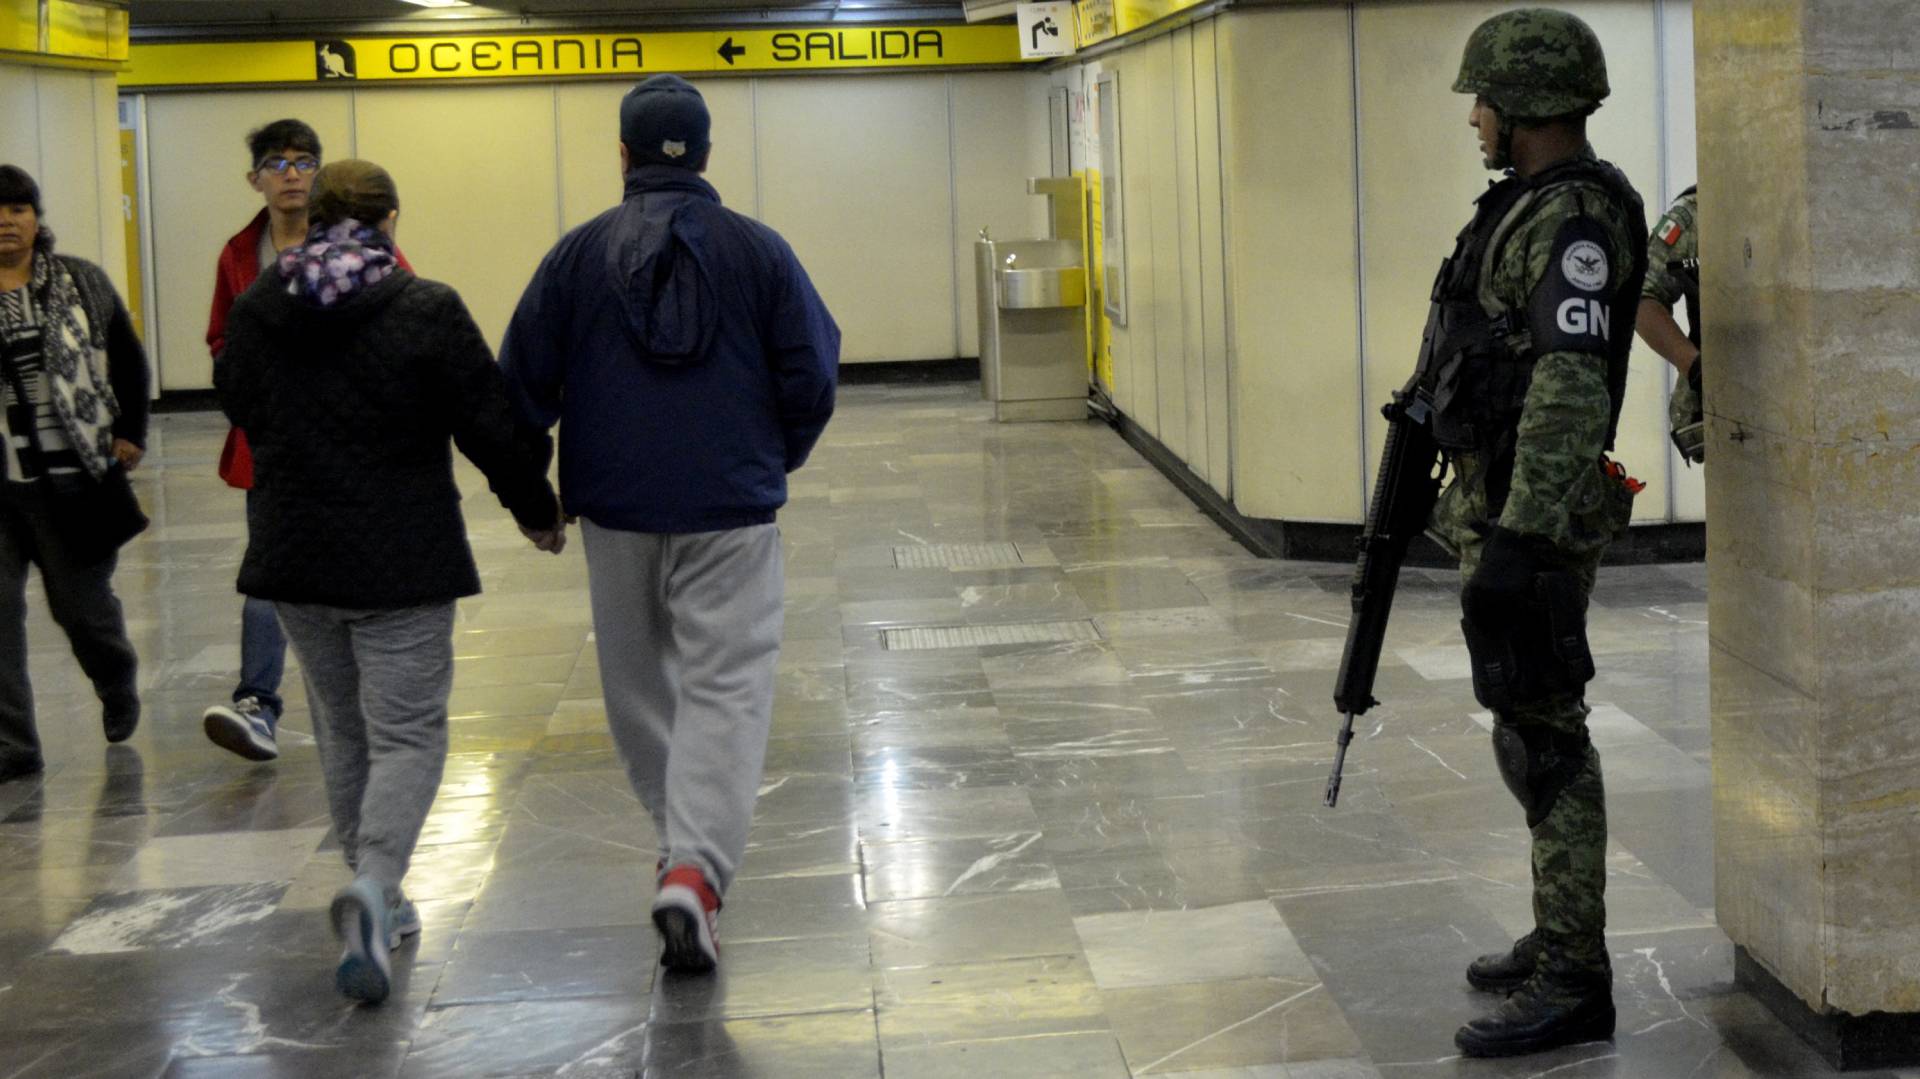 According to the head of the Secretariat for Citizen Security, the presence of the National Guard will not be permanent in the subway (Photo: Cuartoscuro)